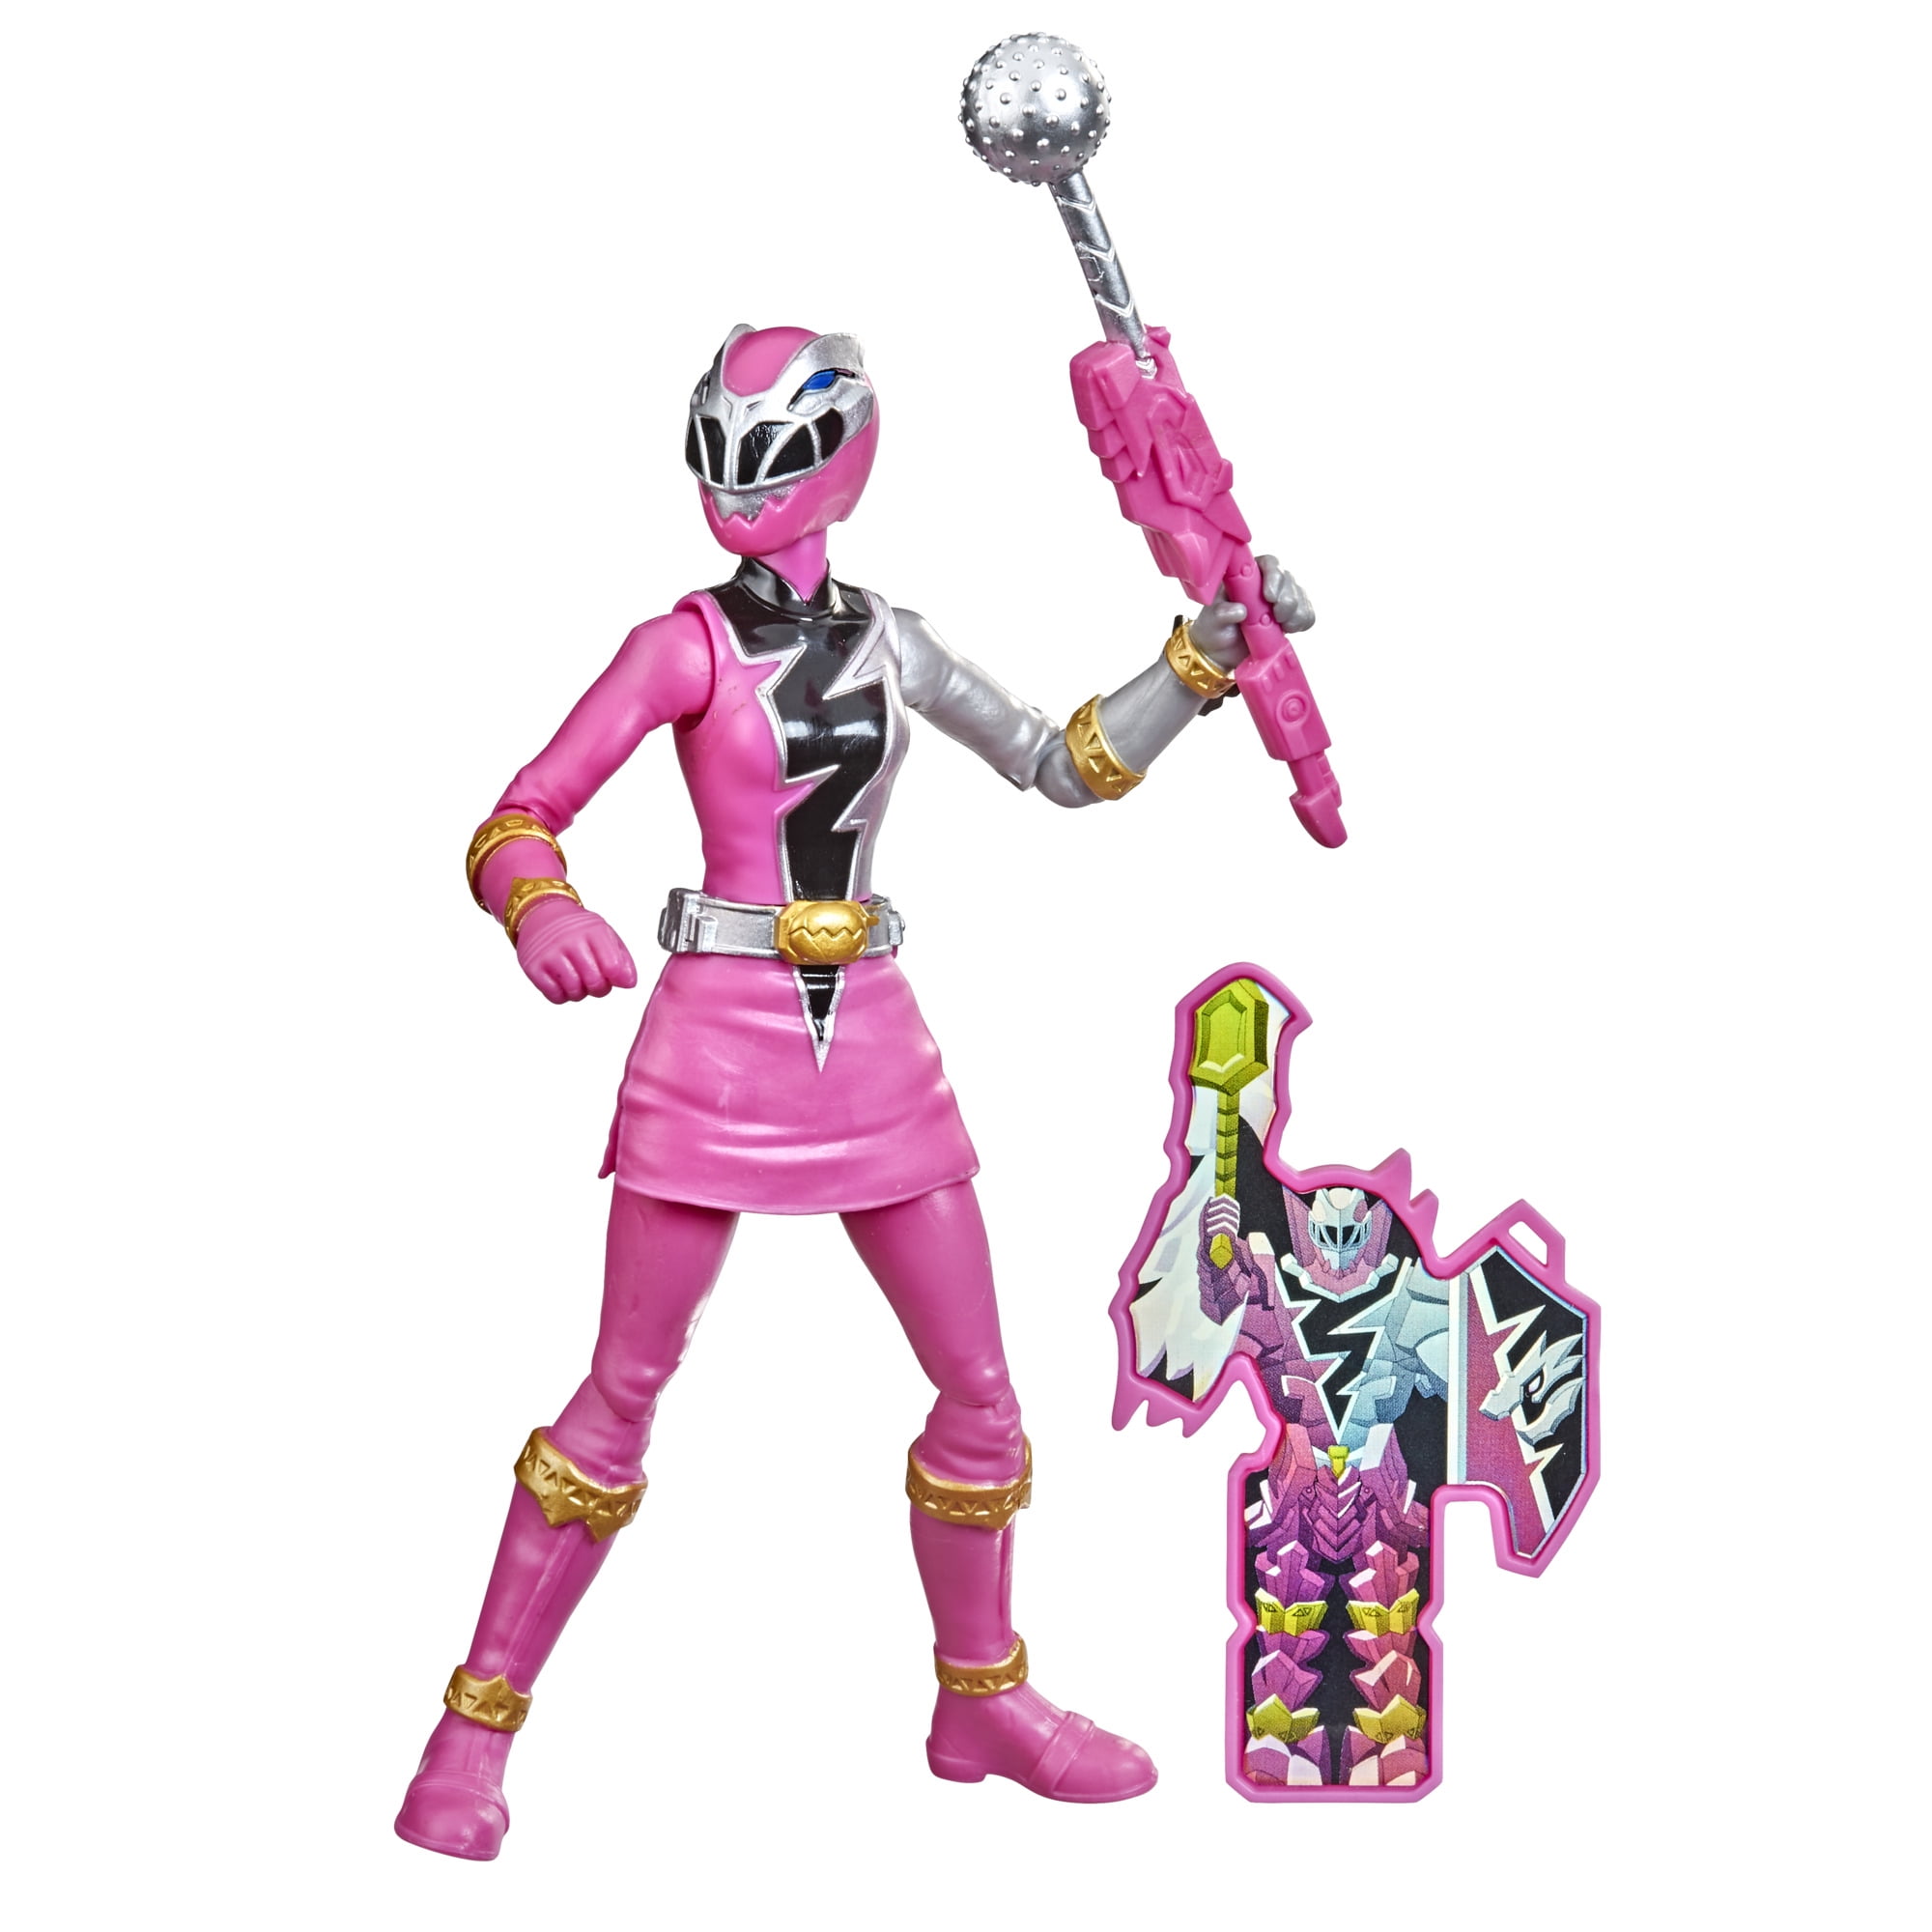 Bandai Mighty Morphin Power Rangers 8" Pink Ranger Action Figure Pink for sale online 